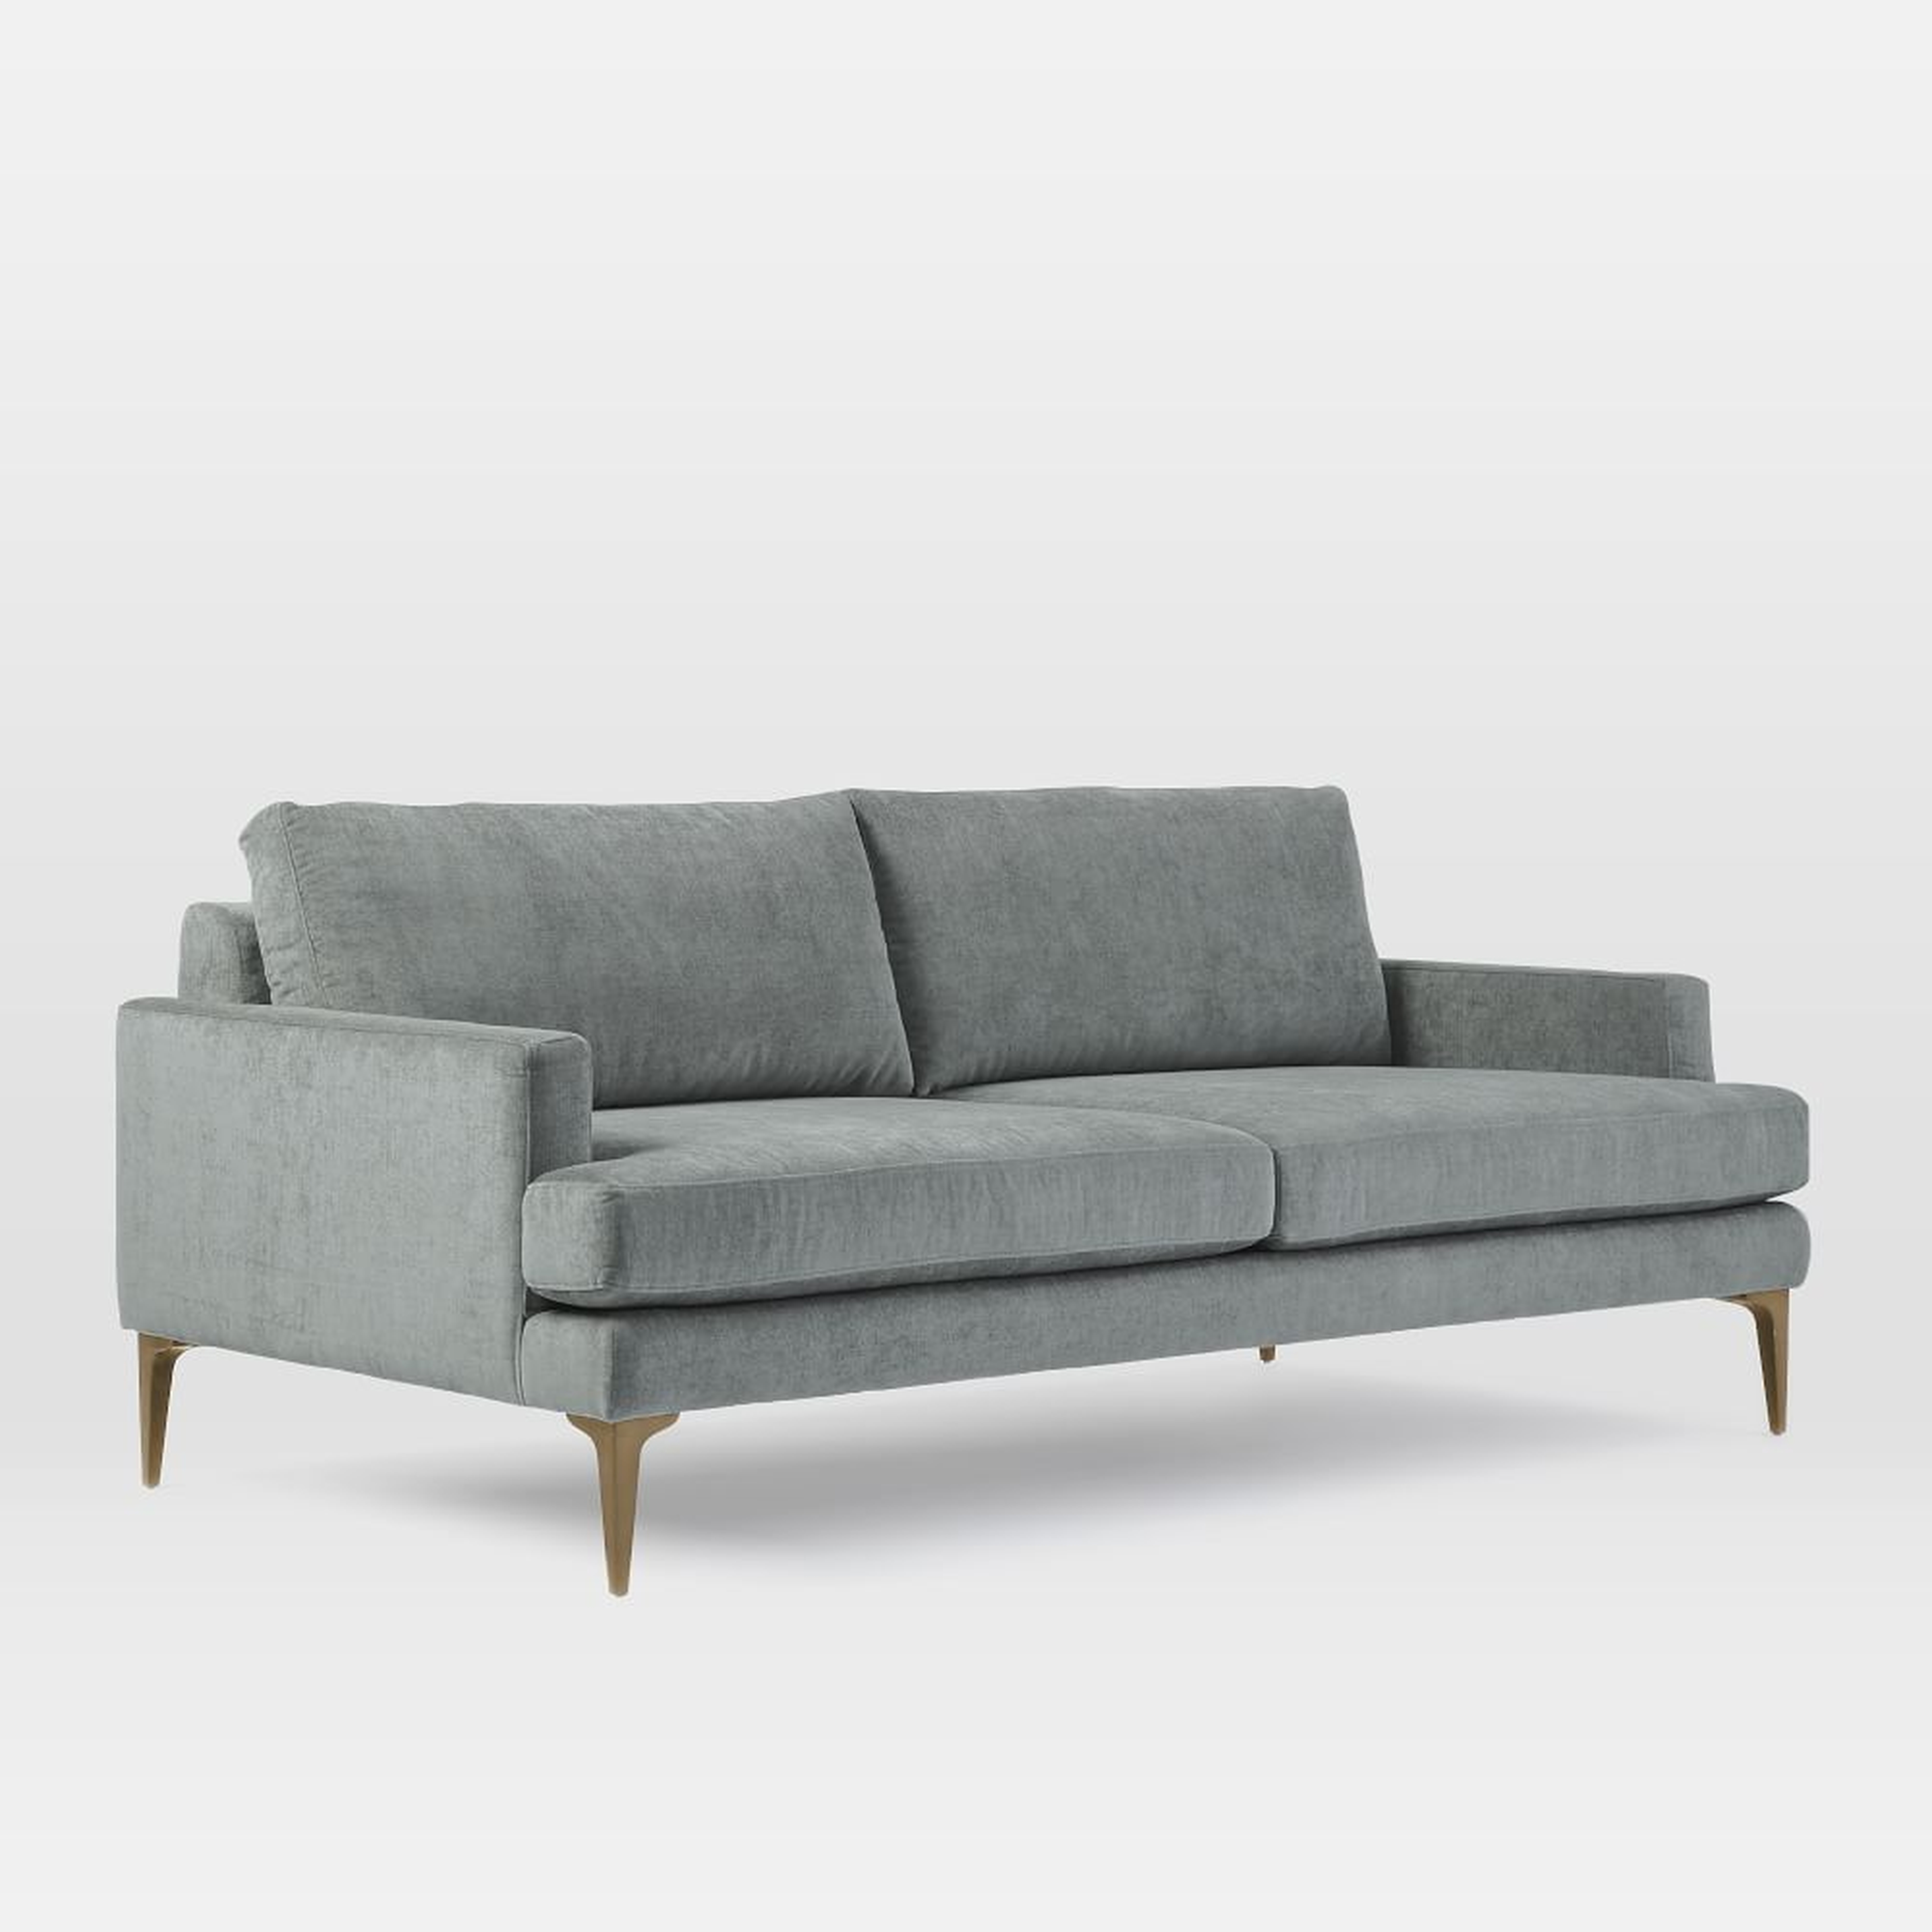 Andes 76.5" Sofa, Poly, Distressed Velvet, Mineral Gray, Blackened Brass - West Elm